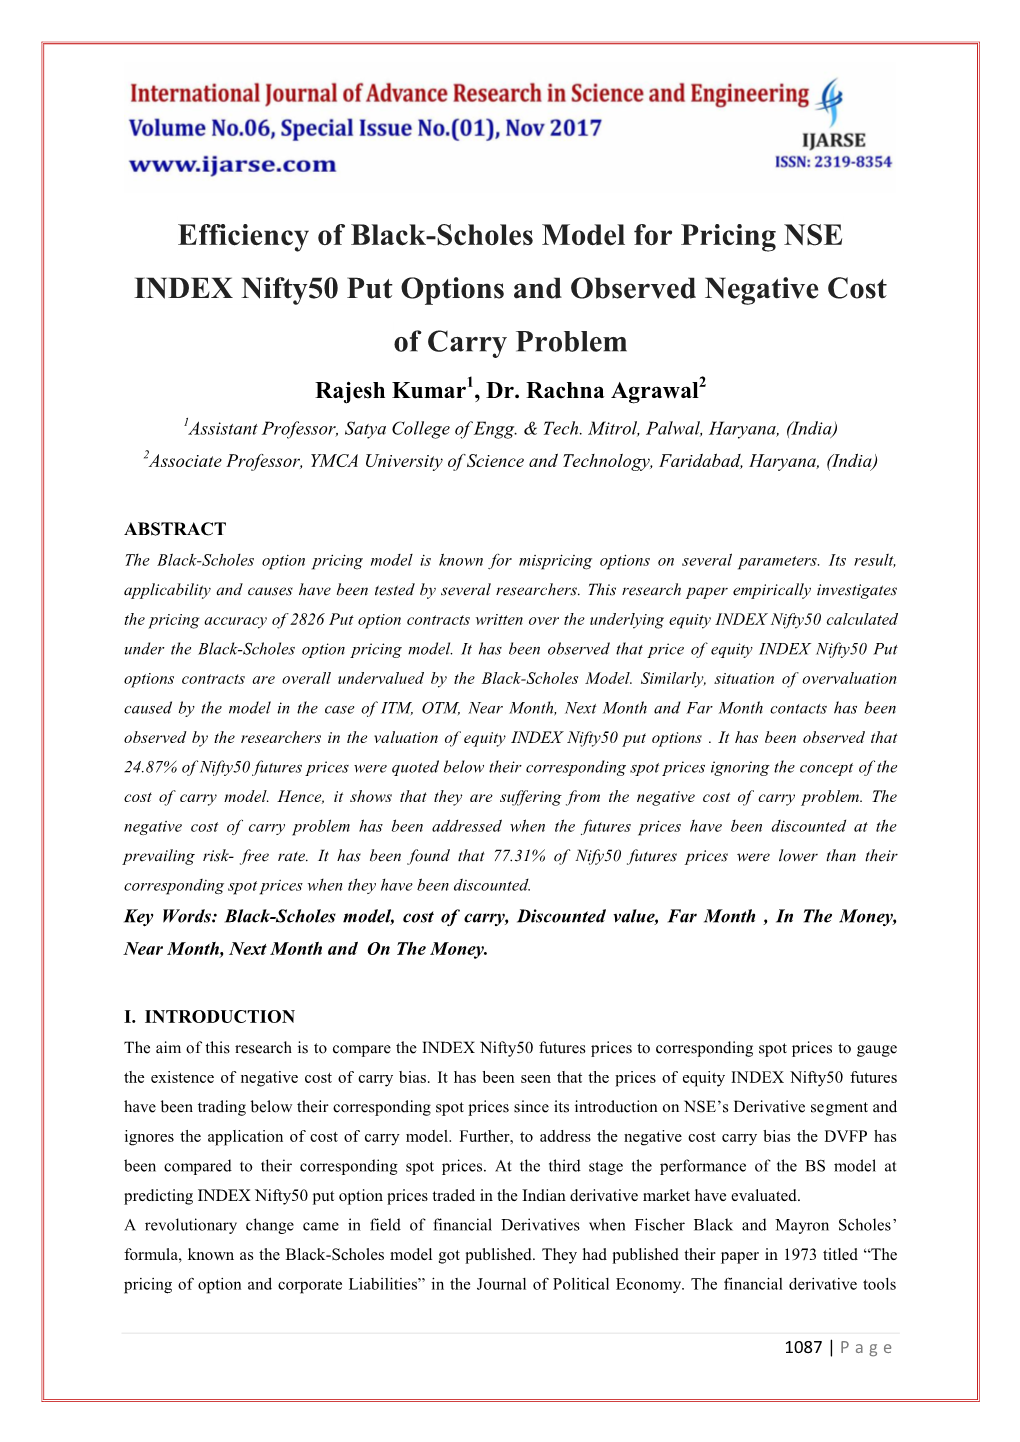 Efficiency of Black-Scholes Model for Pricing NSE INDEX Nifty50 Put Options and Observed Negative Cost of Carry Problem Rajesh Kumar1, Dr